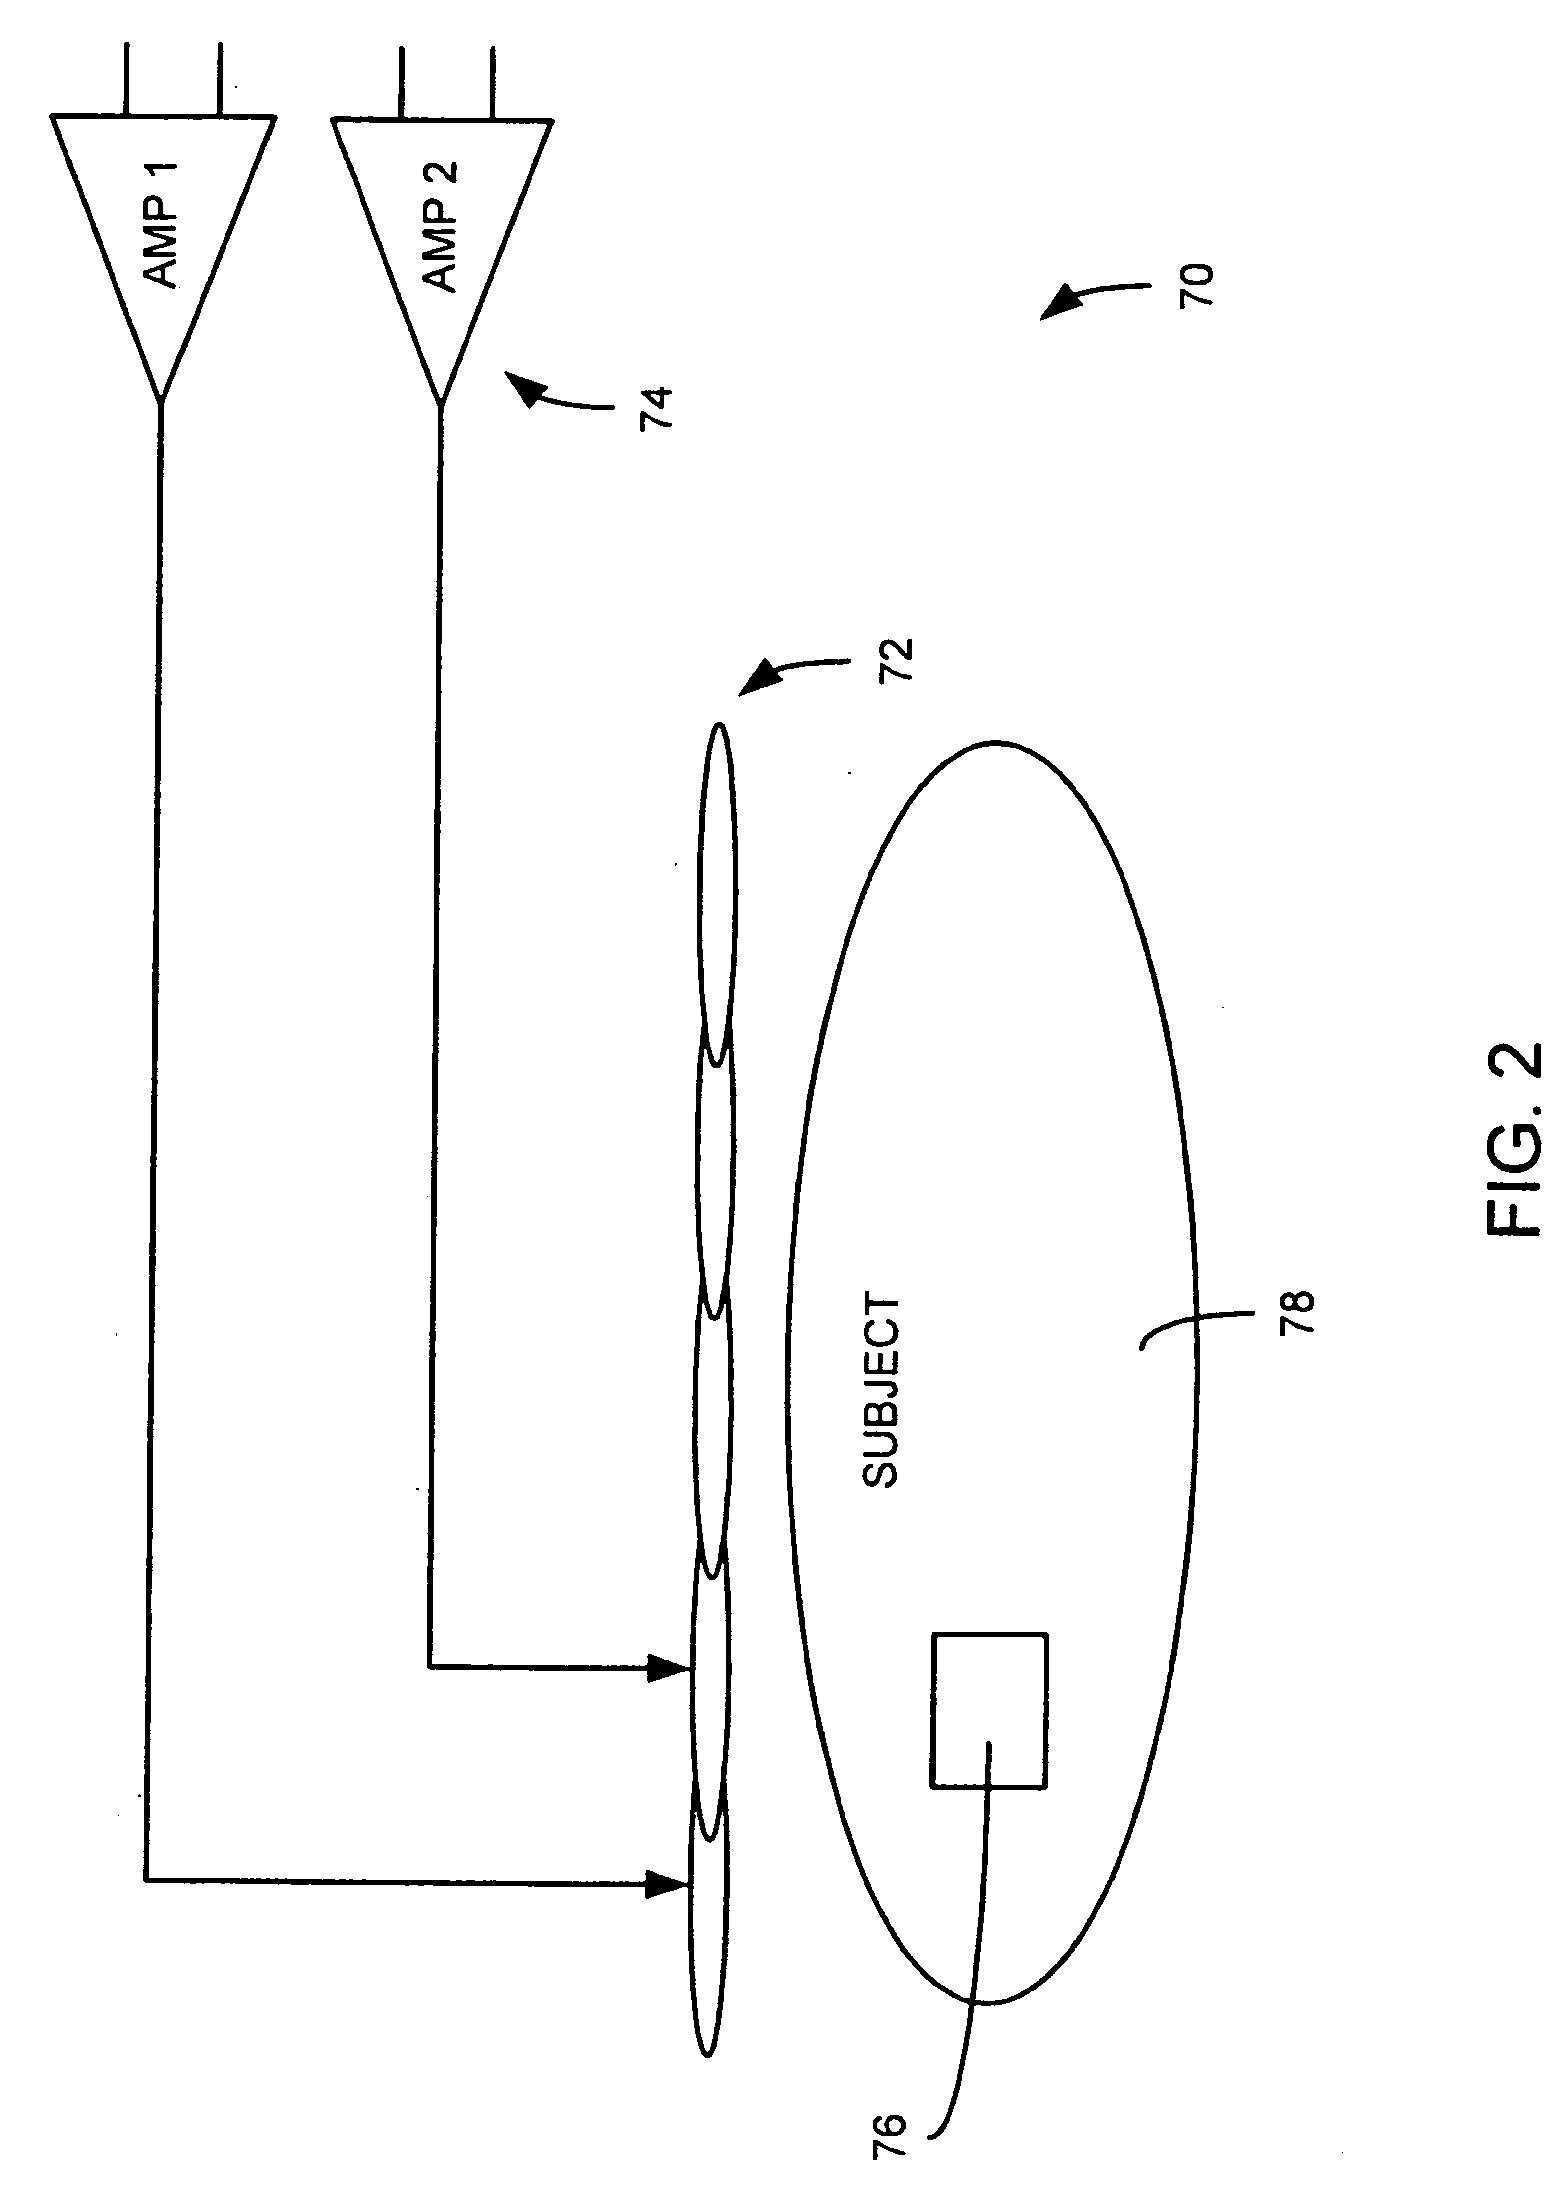 Method and apparatus to reduce RF power deposition during MR data acquisition